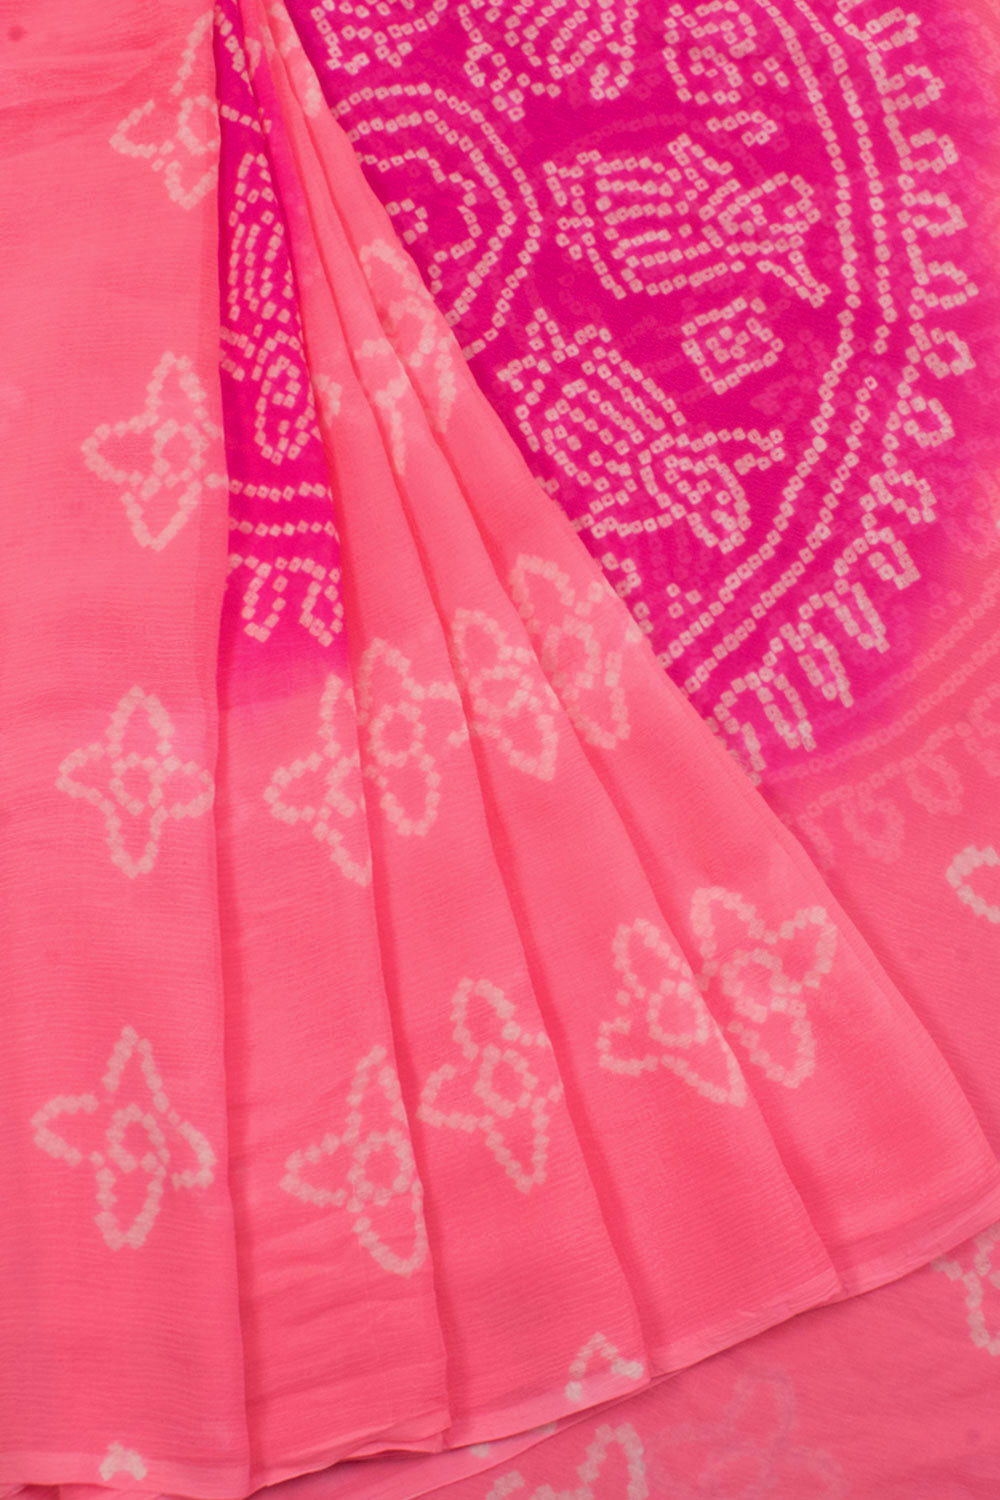 Handcrafted Bandhani Chiffon Saree with Floral Design